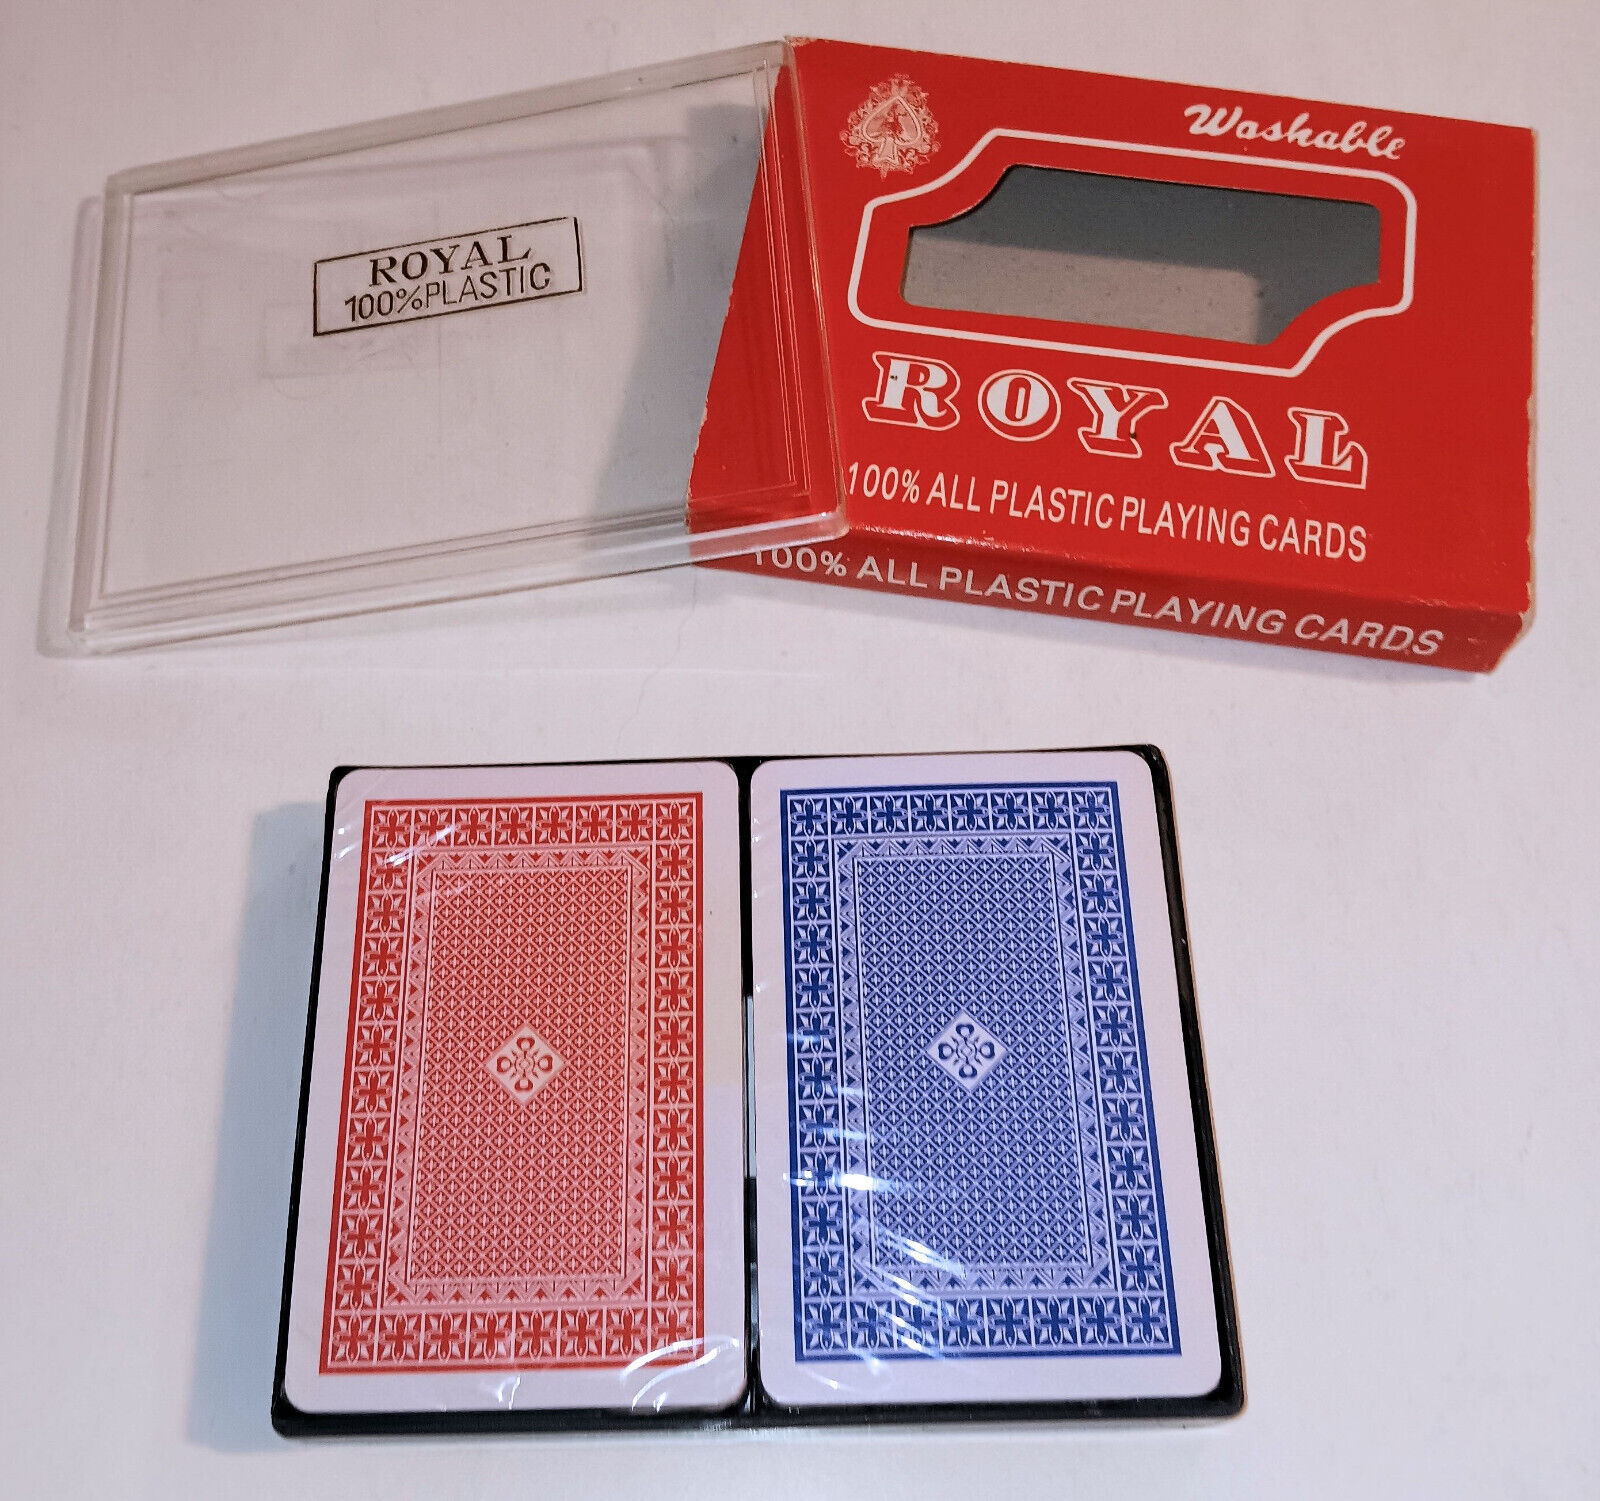 ROYAL 100% All Plastic Washable PLAYING CARDS Double Deck w Case - Decks SEALED